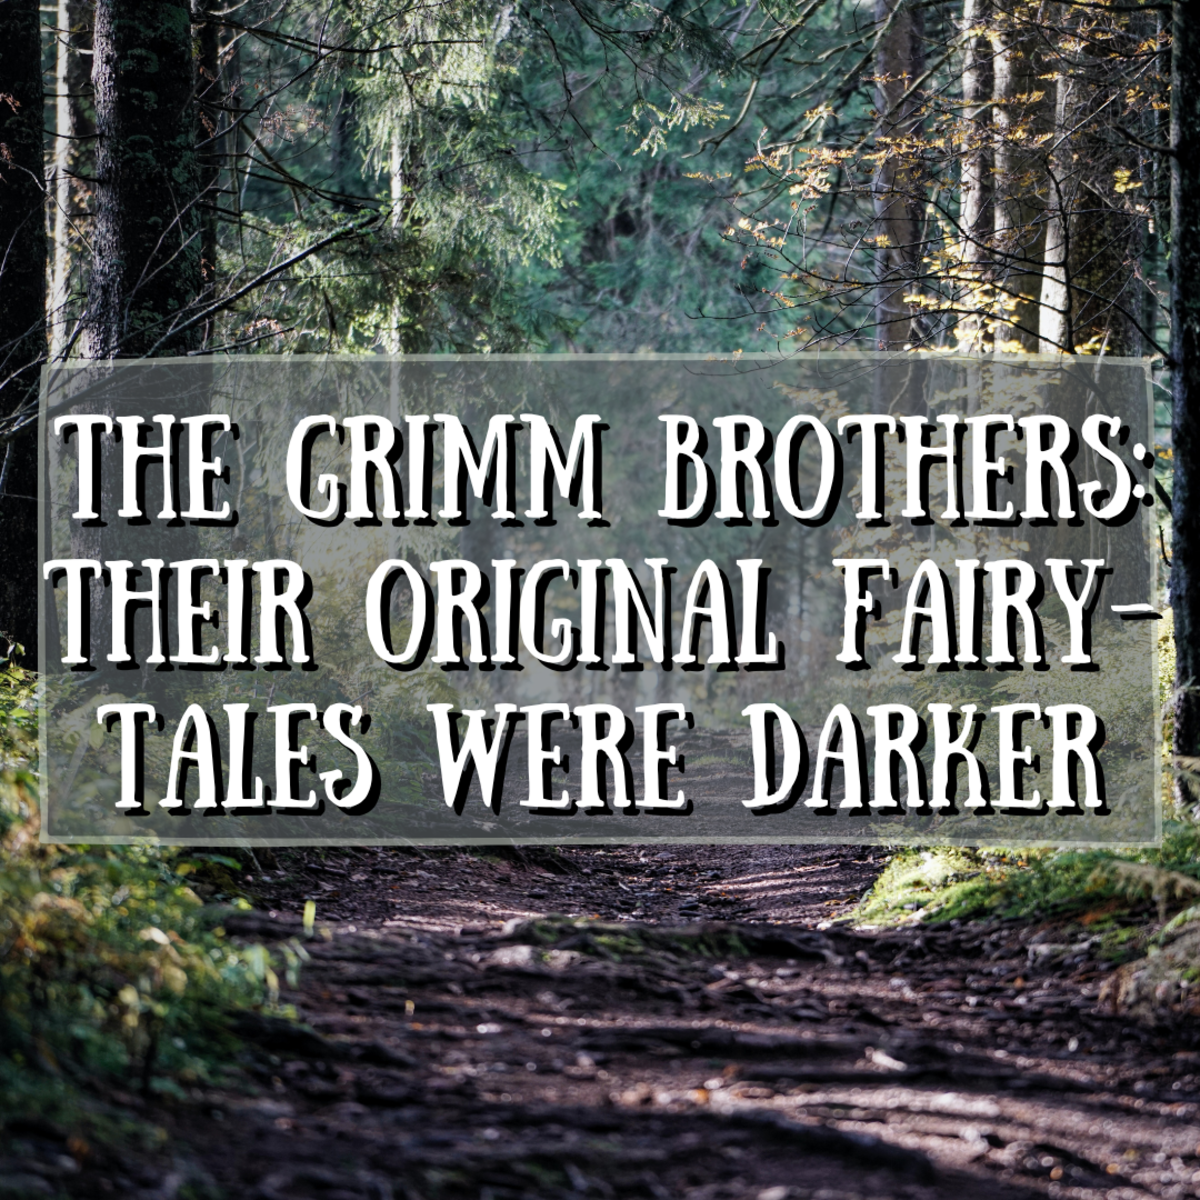 Read on to learn about the original versions of Grimm's fairy tales. You might be surprised by what you learn!